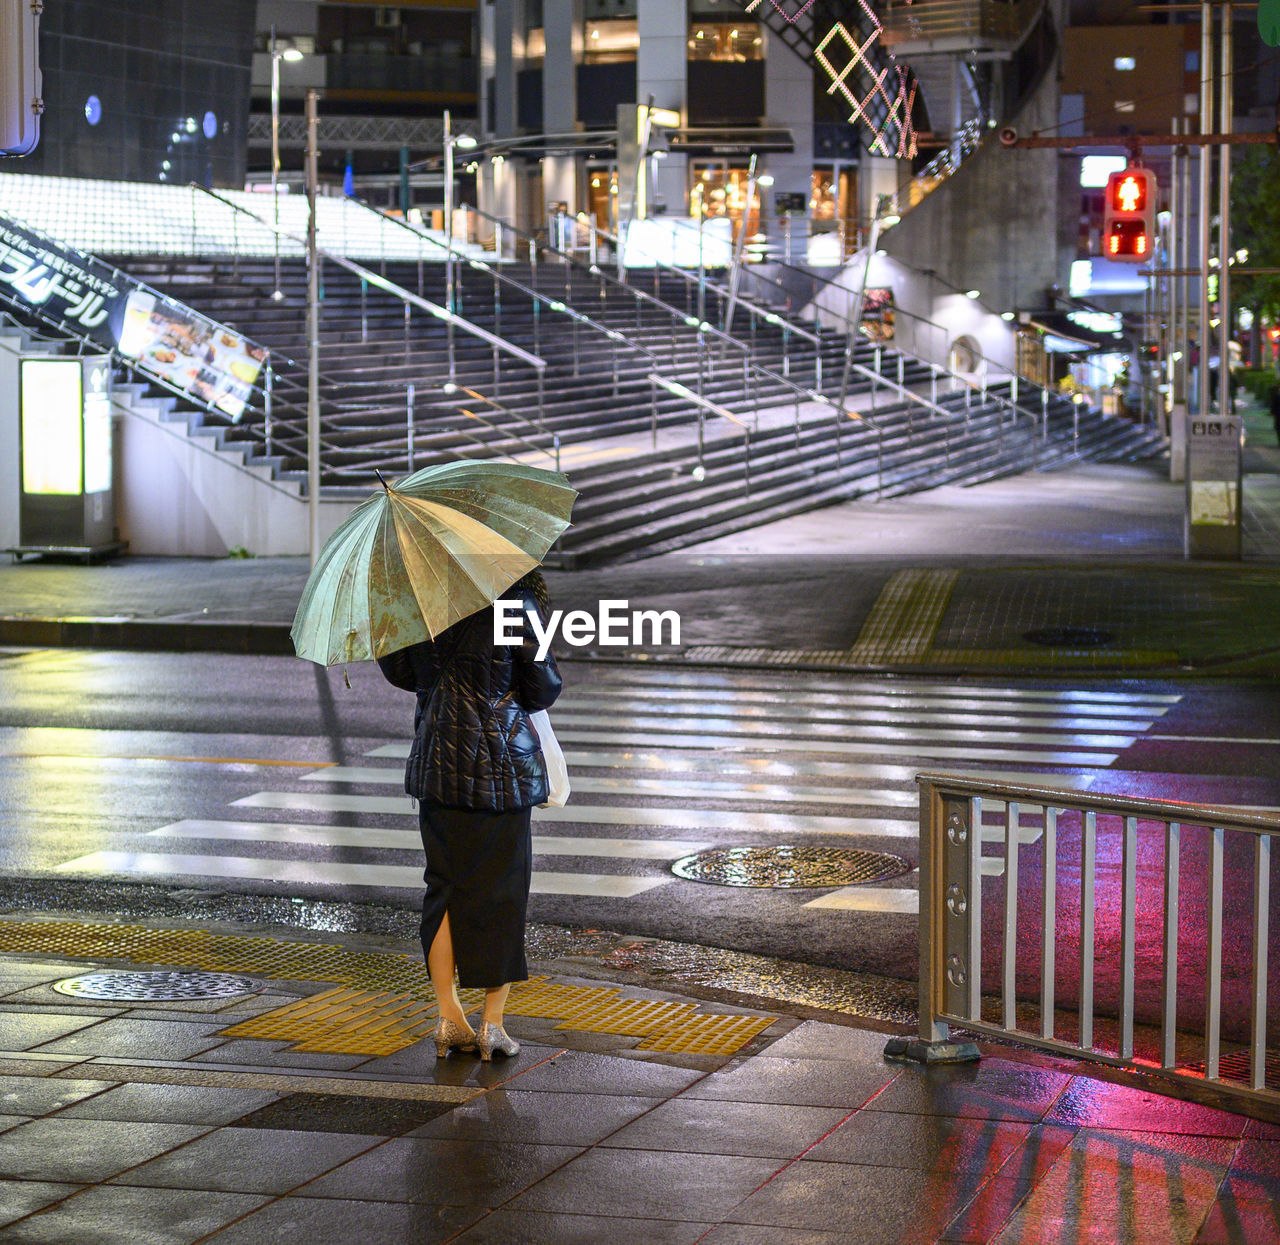 A woman holding an umbrella, waiting to cross the street in tokyo.